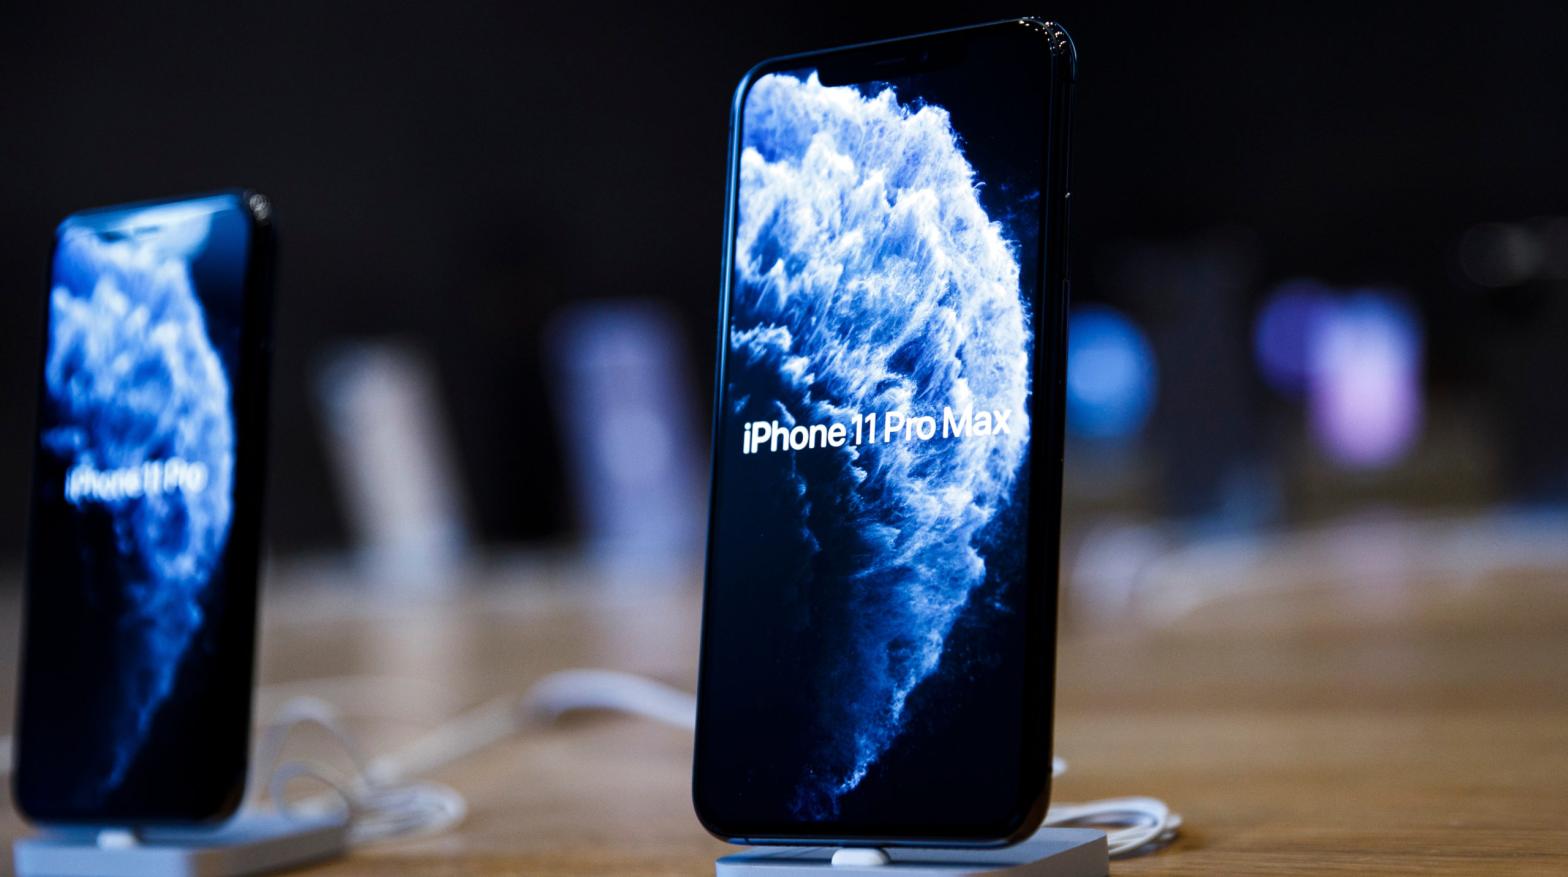 New Apple iPhone 11 are shown in a Apple store on the first day of the phone's sale at the Apple Store on September 20, 2019 in Berlin, Germany.  (Photo: Carsten Koall, Getty Images)